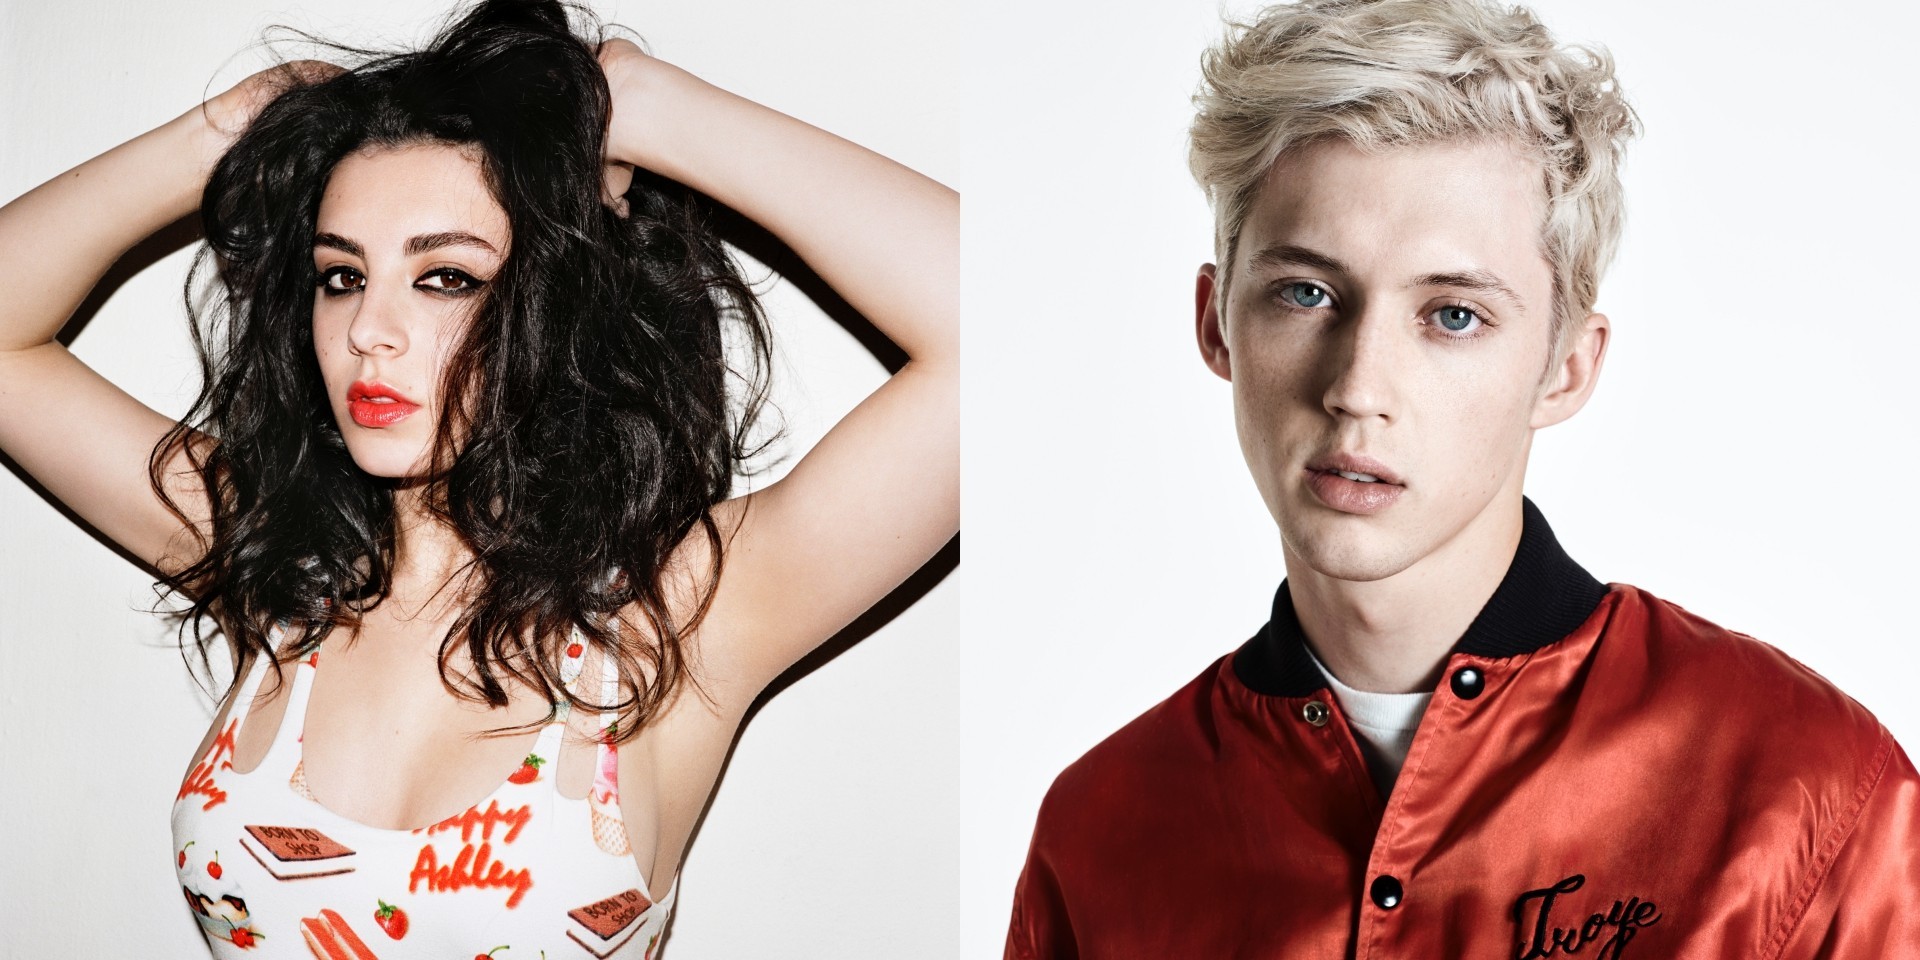 Charli XCX and Troye Sivan throwback in style on collaborative single '1999' – review